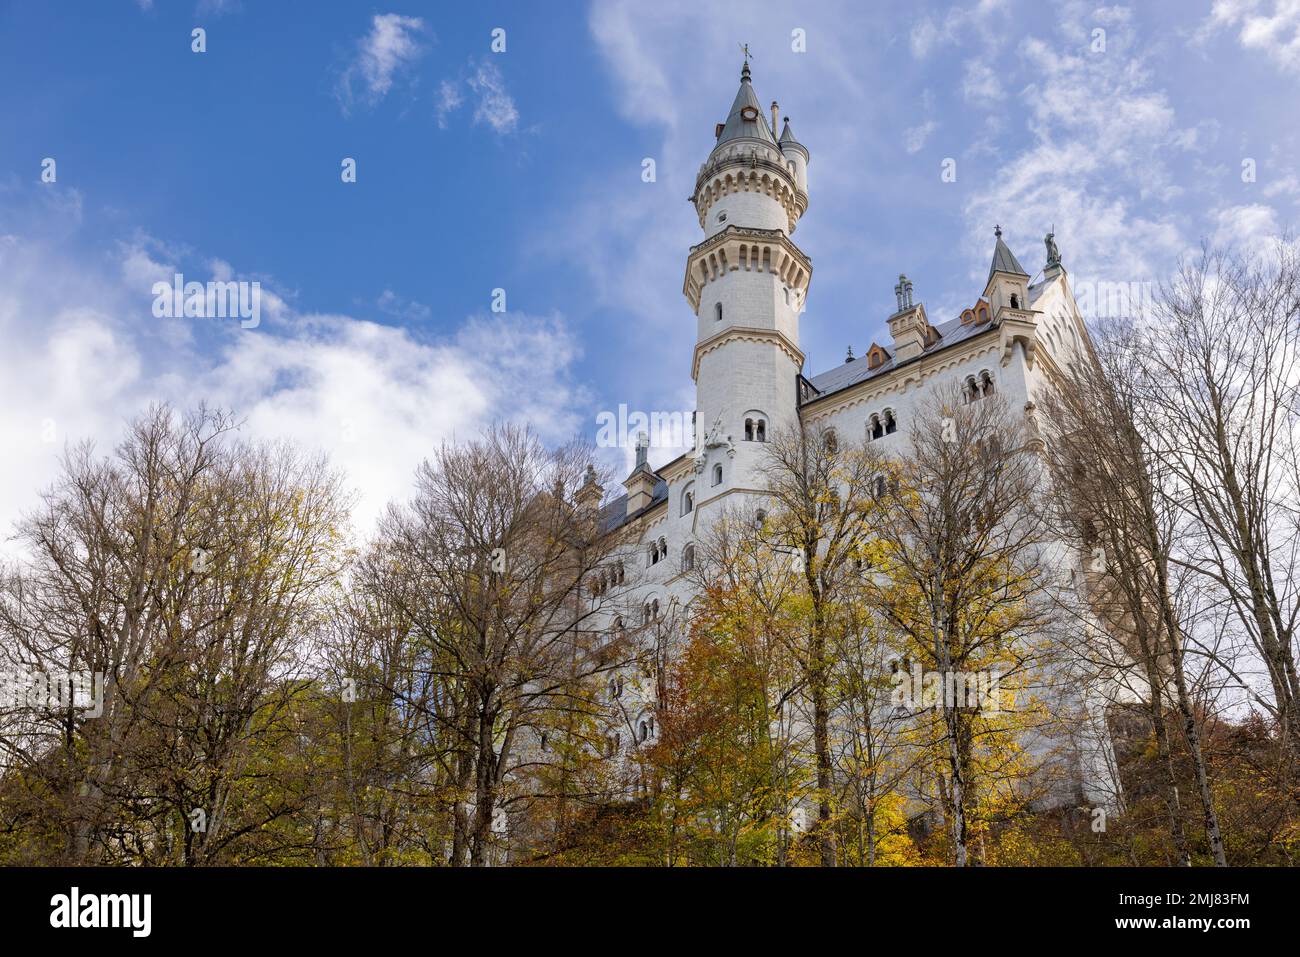 Neuschwanstein castle in Schwangau Germany, low angled view of the tower on a sunny autumn day. Stock Photo